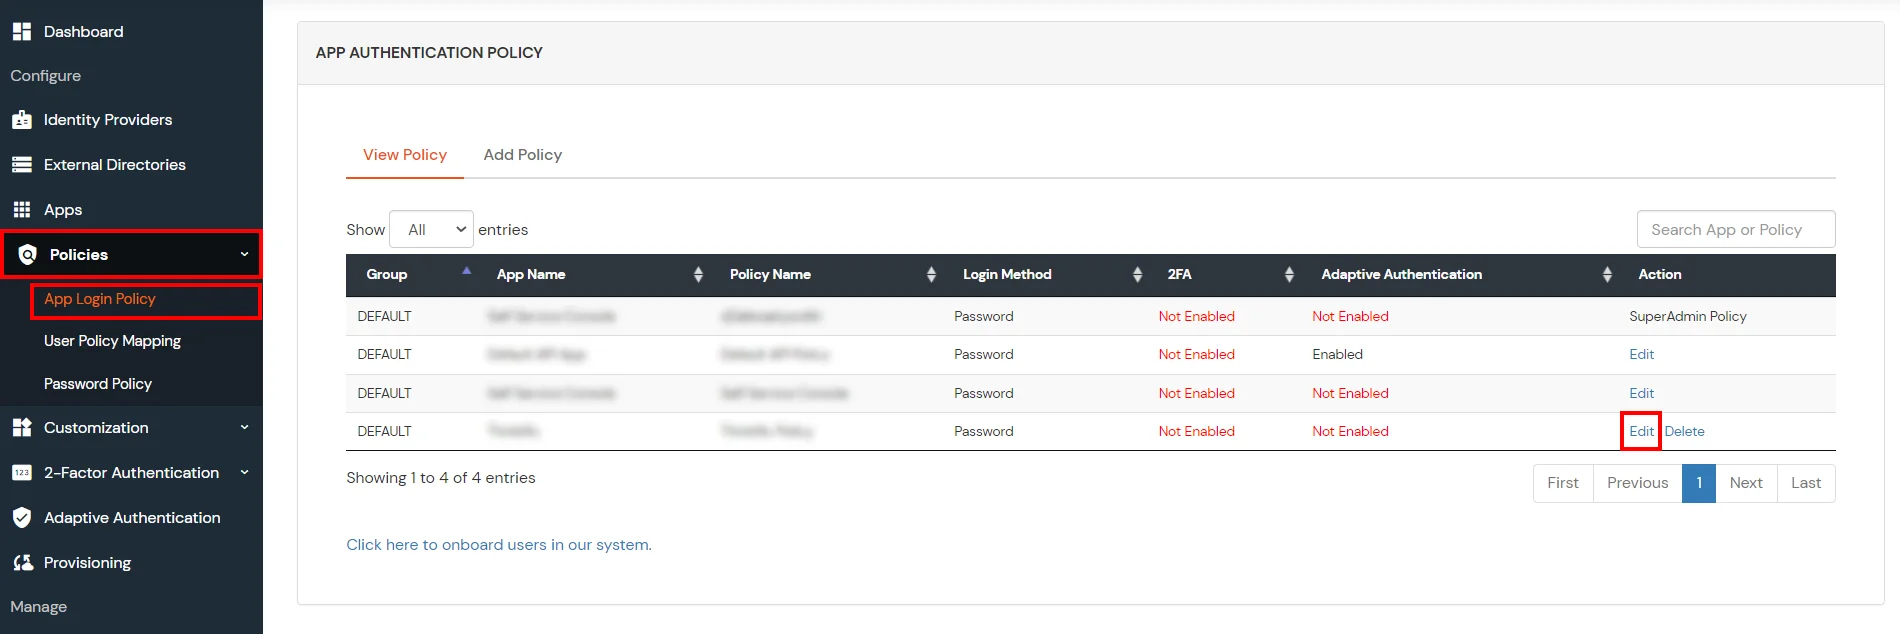 Magento Single Sign-On (sso) edit device restriction policy